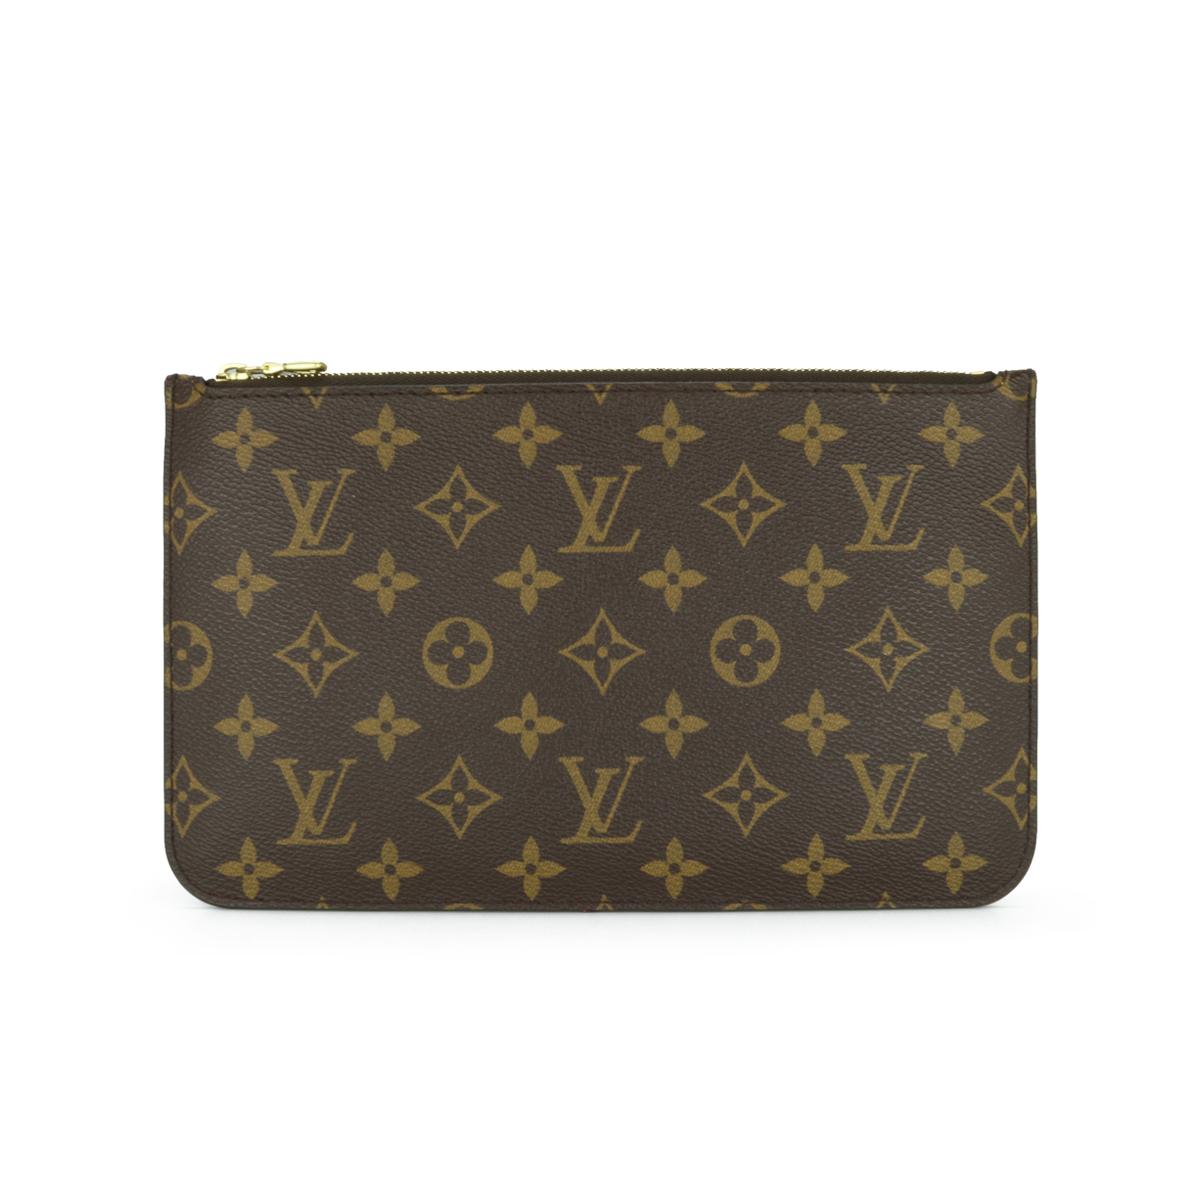 Louis Vuitton Neverfull MM Zip Pochette Pouch in Monogram with Beige Interior 2016.

This pouch is in good condition. 

- Exterior Condition: Good condition. The outside of the pouch shows signs of wear. There is inking wear to the corners, two